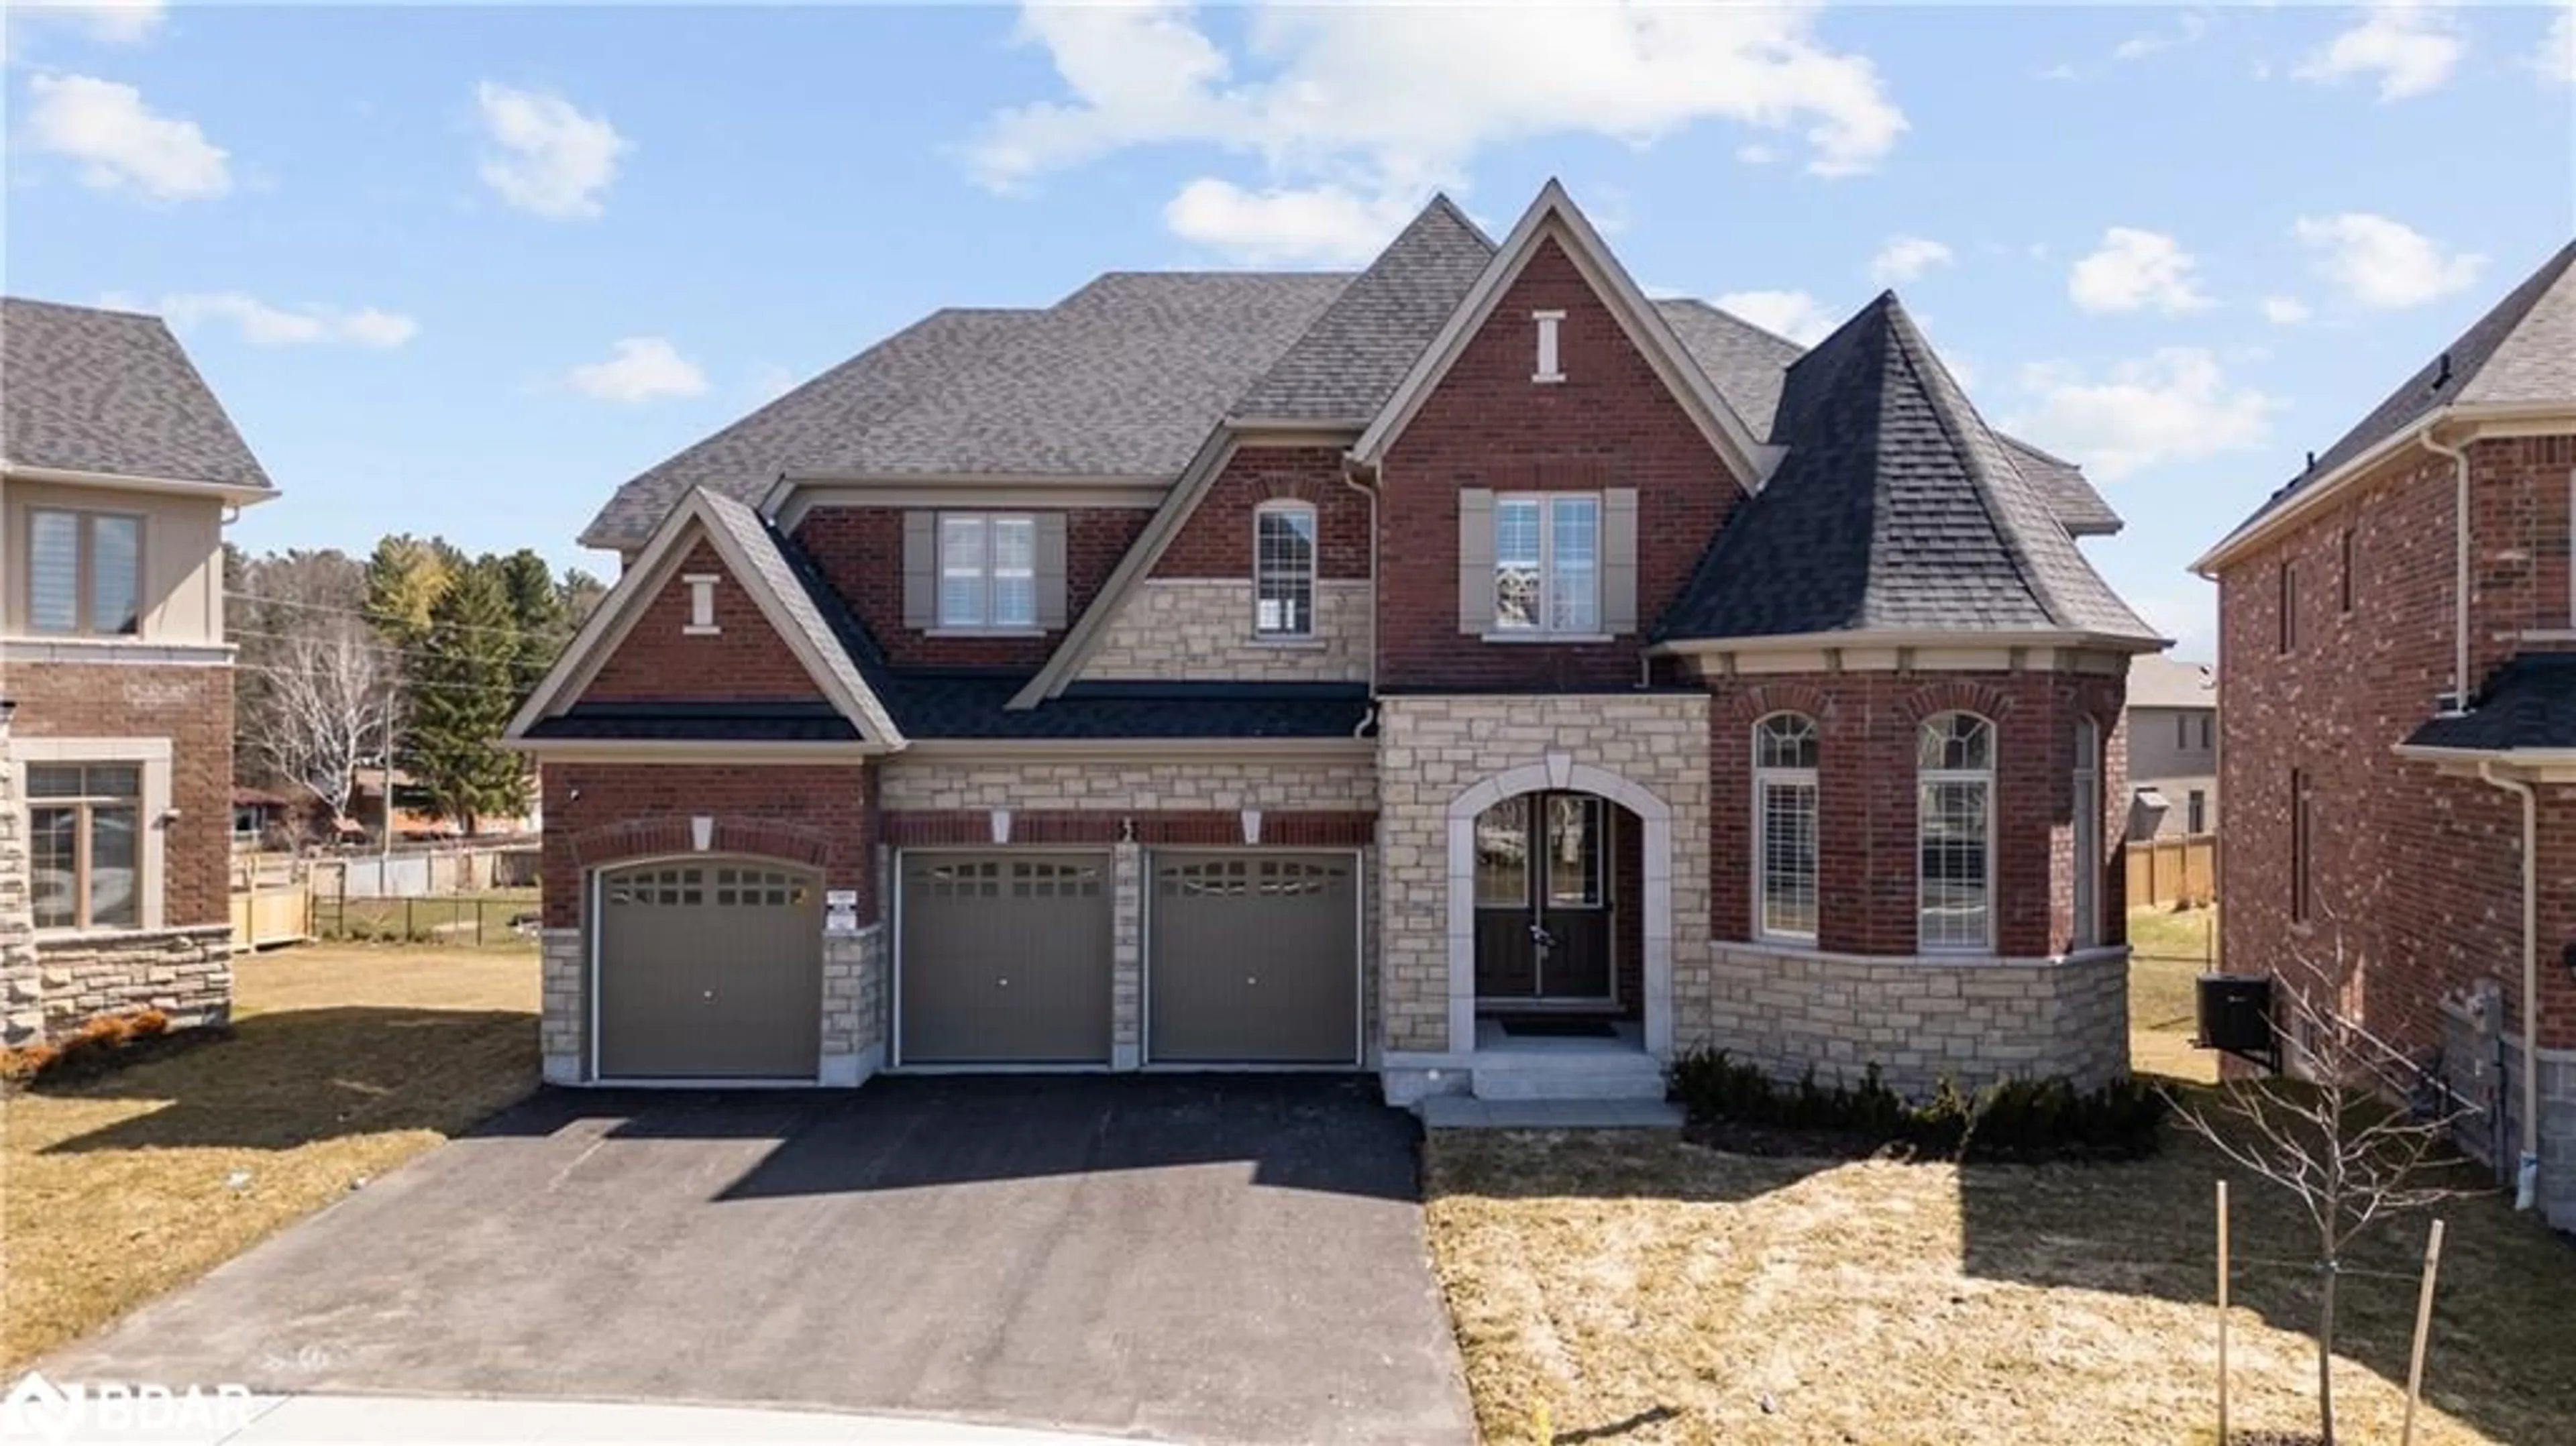 Home with brick exterior material for 53 Sanford Cir, Springwater Ontario L9X 2A9